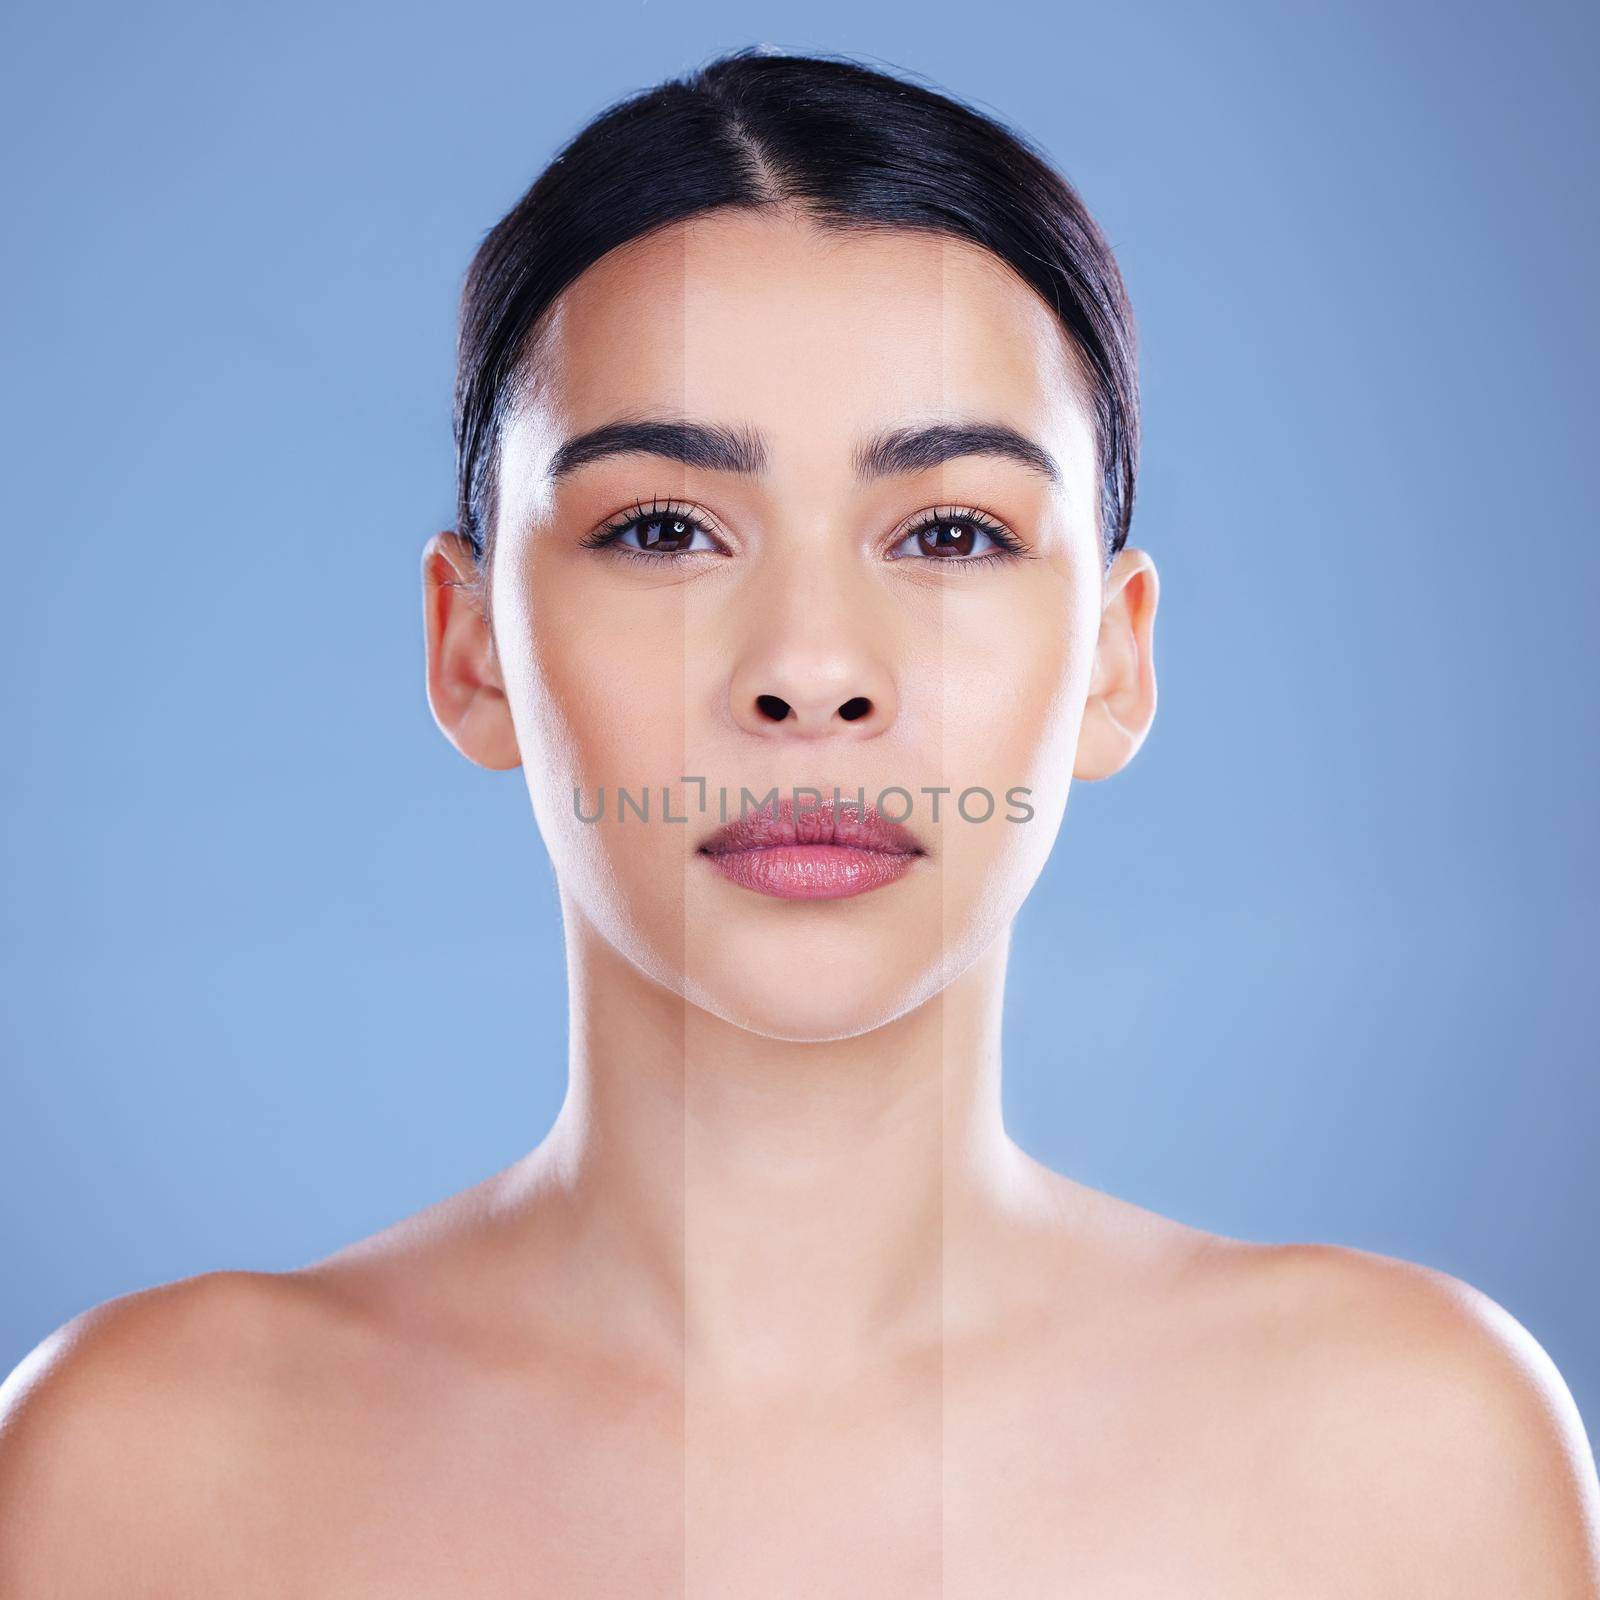 an attractive young woman posing alone against a blue background in the studio with different skin tones.